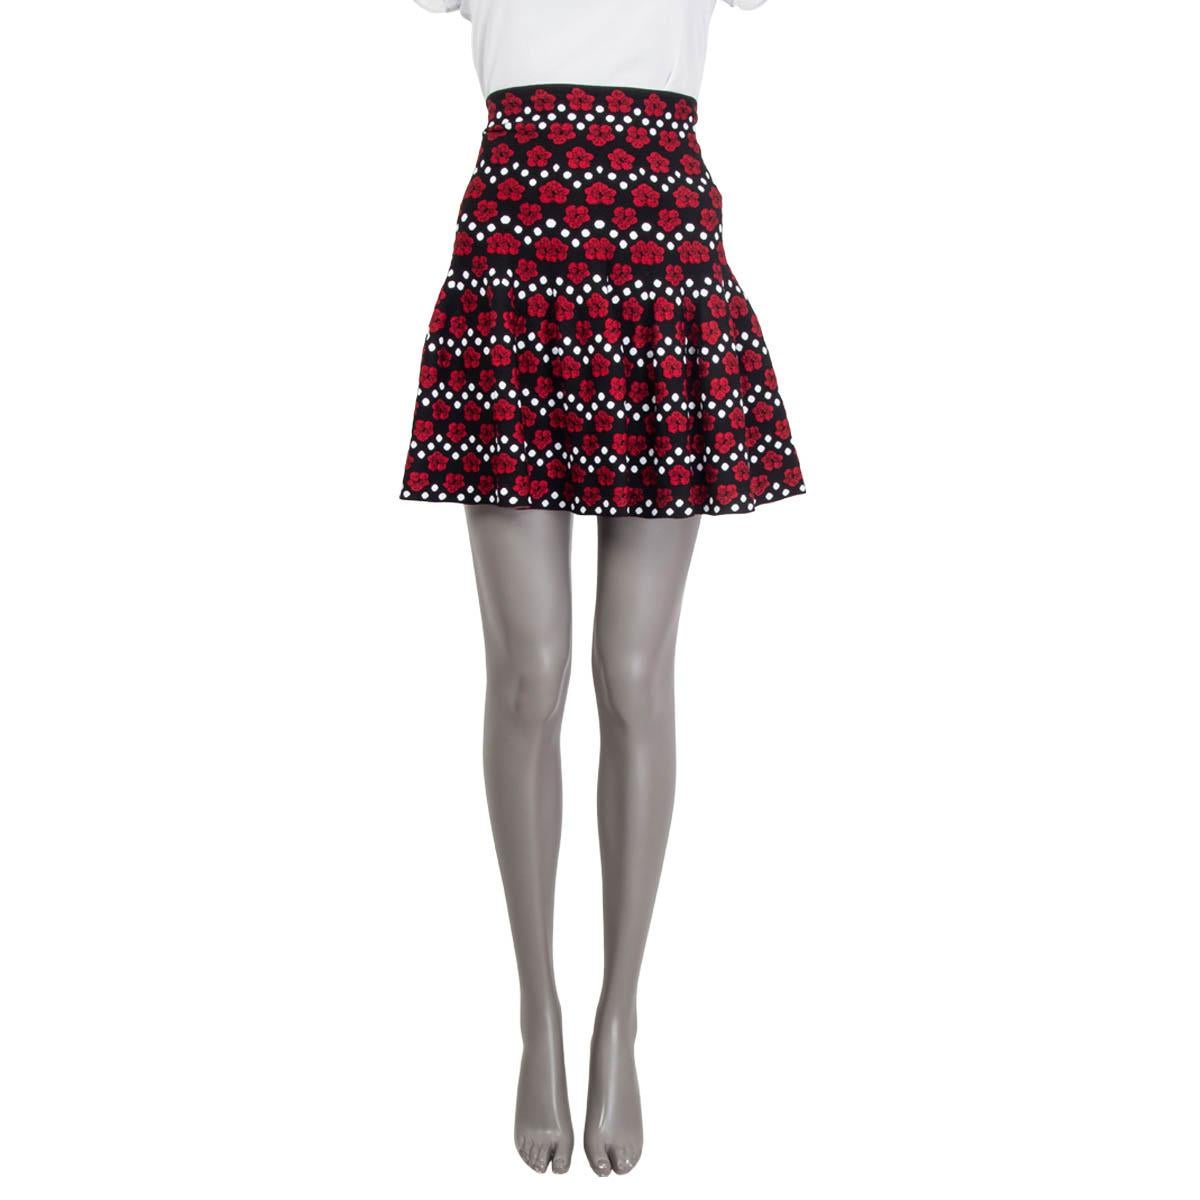 100% authentic Alaia jacquard knitted high waisted mini skirt in black, red and white viscose (78%), polyester (13%), nylon (7%) and elastane (2%). Features a floral and polka dot print. Opens with hook and a concealed zipper at the back. Unlined.